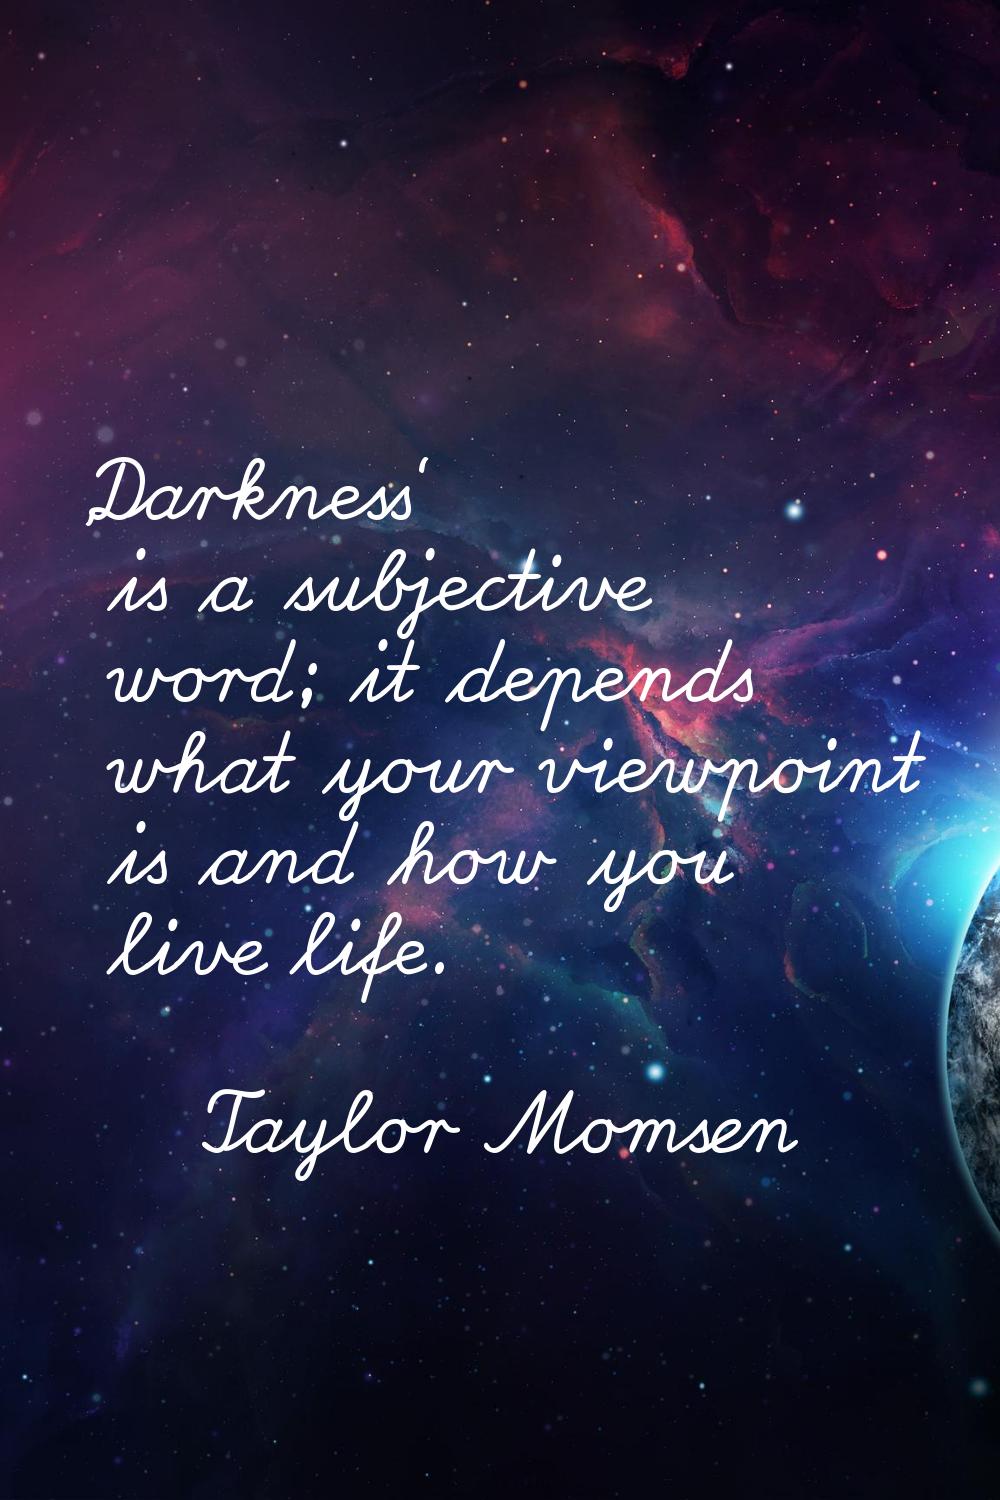 'Darkness' is a subjective word; it depends what your viewpoint is and how you live life.